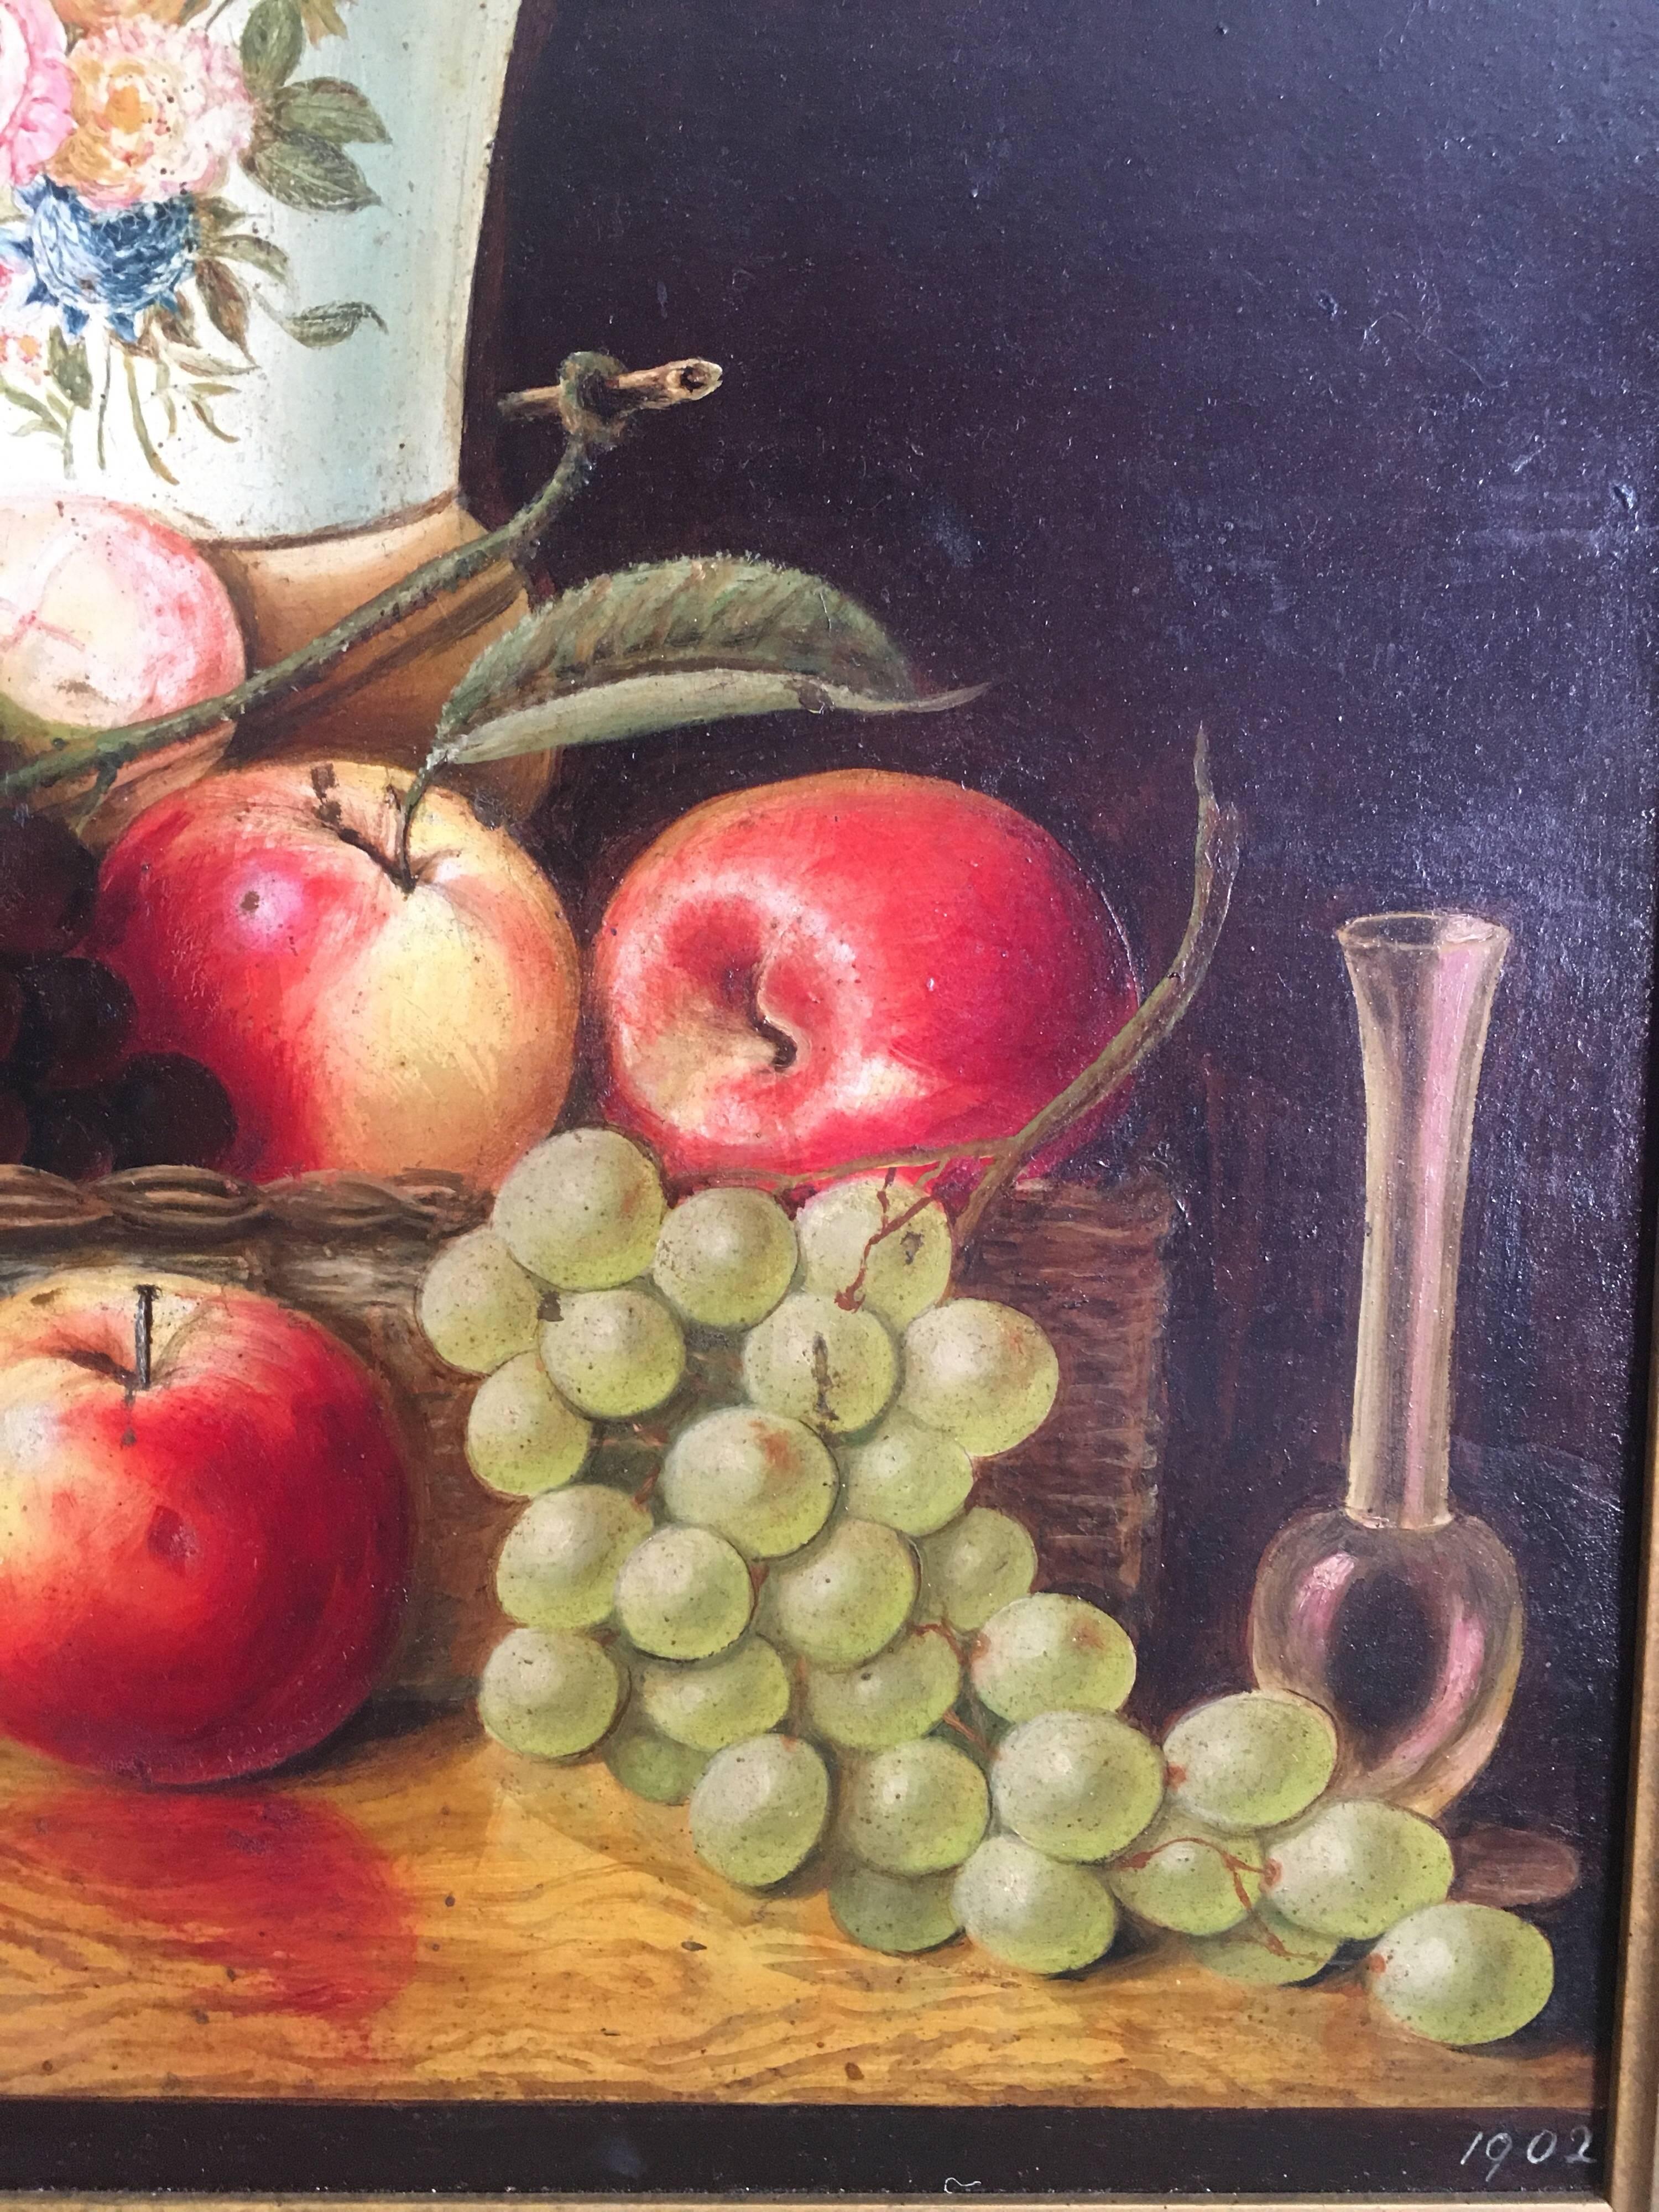 Fine Still Life Fruit 
English School, Early 20th Century 
Oil painting on board, framed
Dated '1902' on the lower right corner
Framed size: 25 x 22 inches

Lovely details especially to the vase, to which there is a beautiful flower motif on the